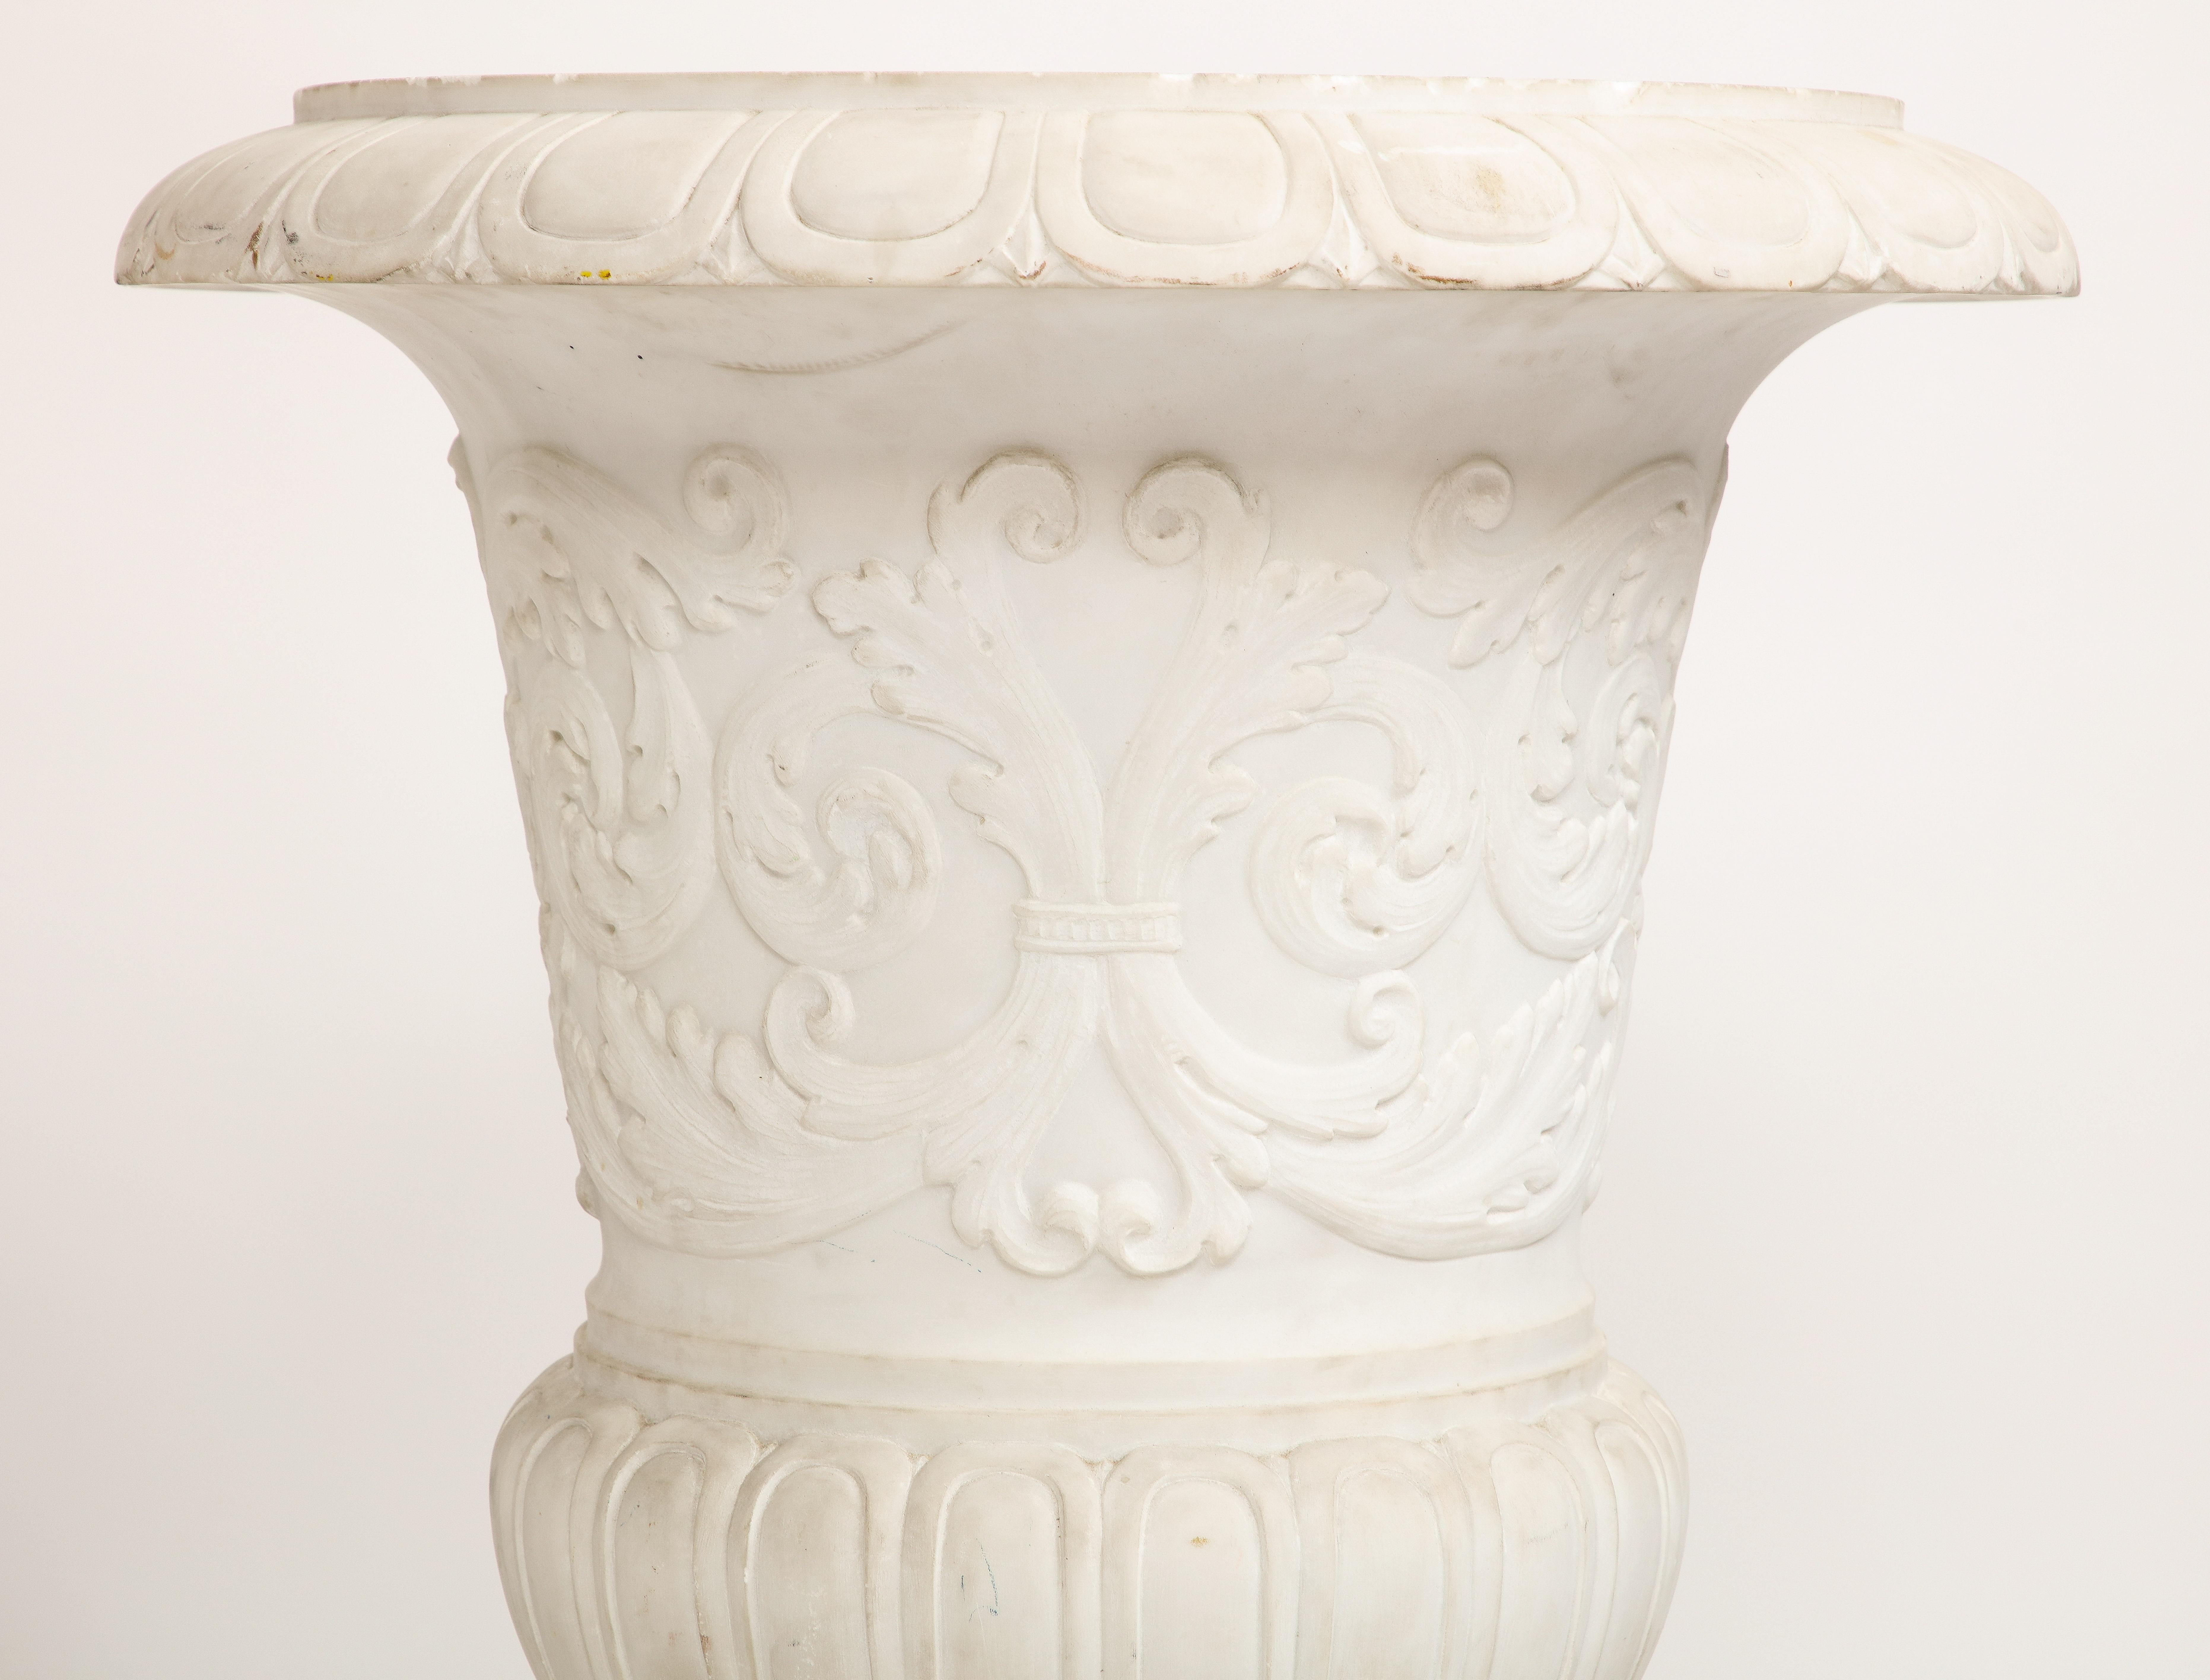 Pair of Italian Carrara Marble Medici Vases w/ Neoclassical Motifs in Relief For Sale 4